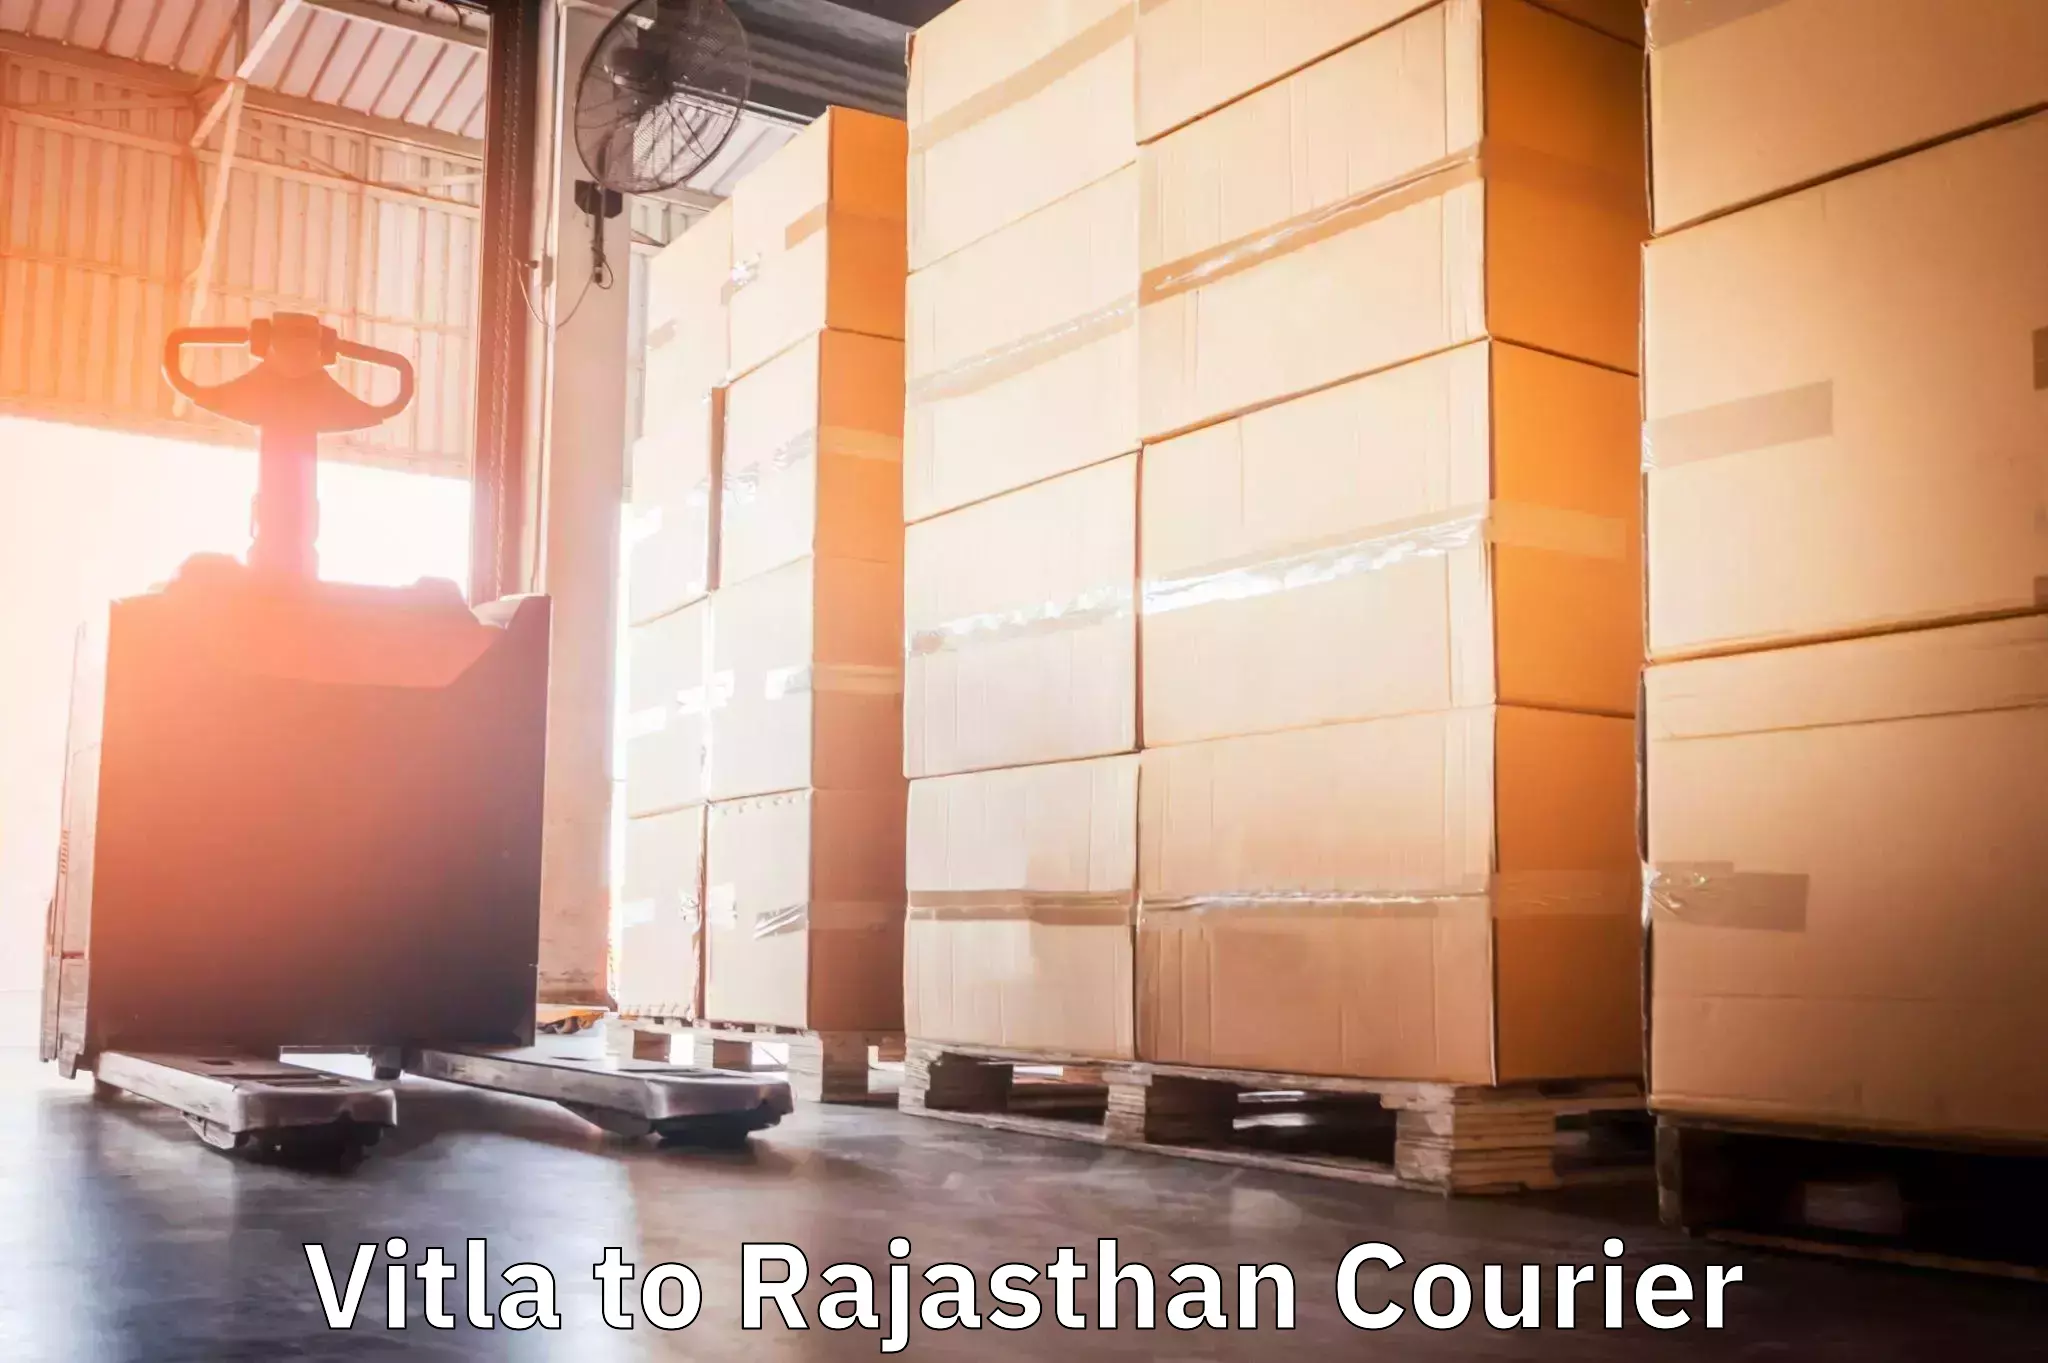 State-of-the-art courier technology Vitla to Bassi